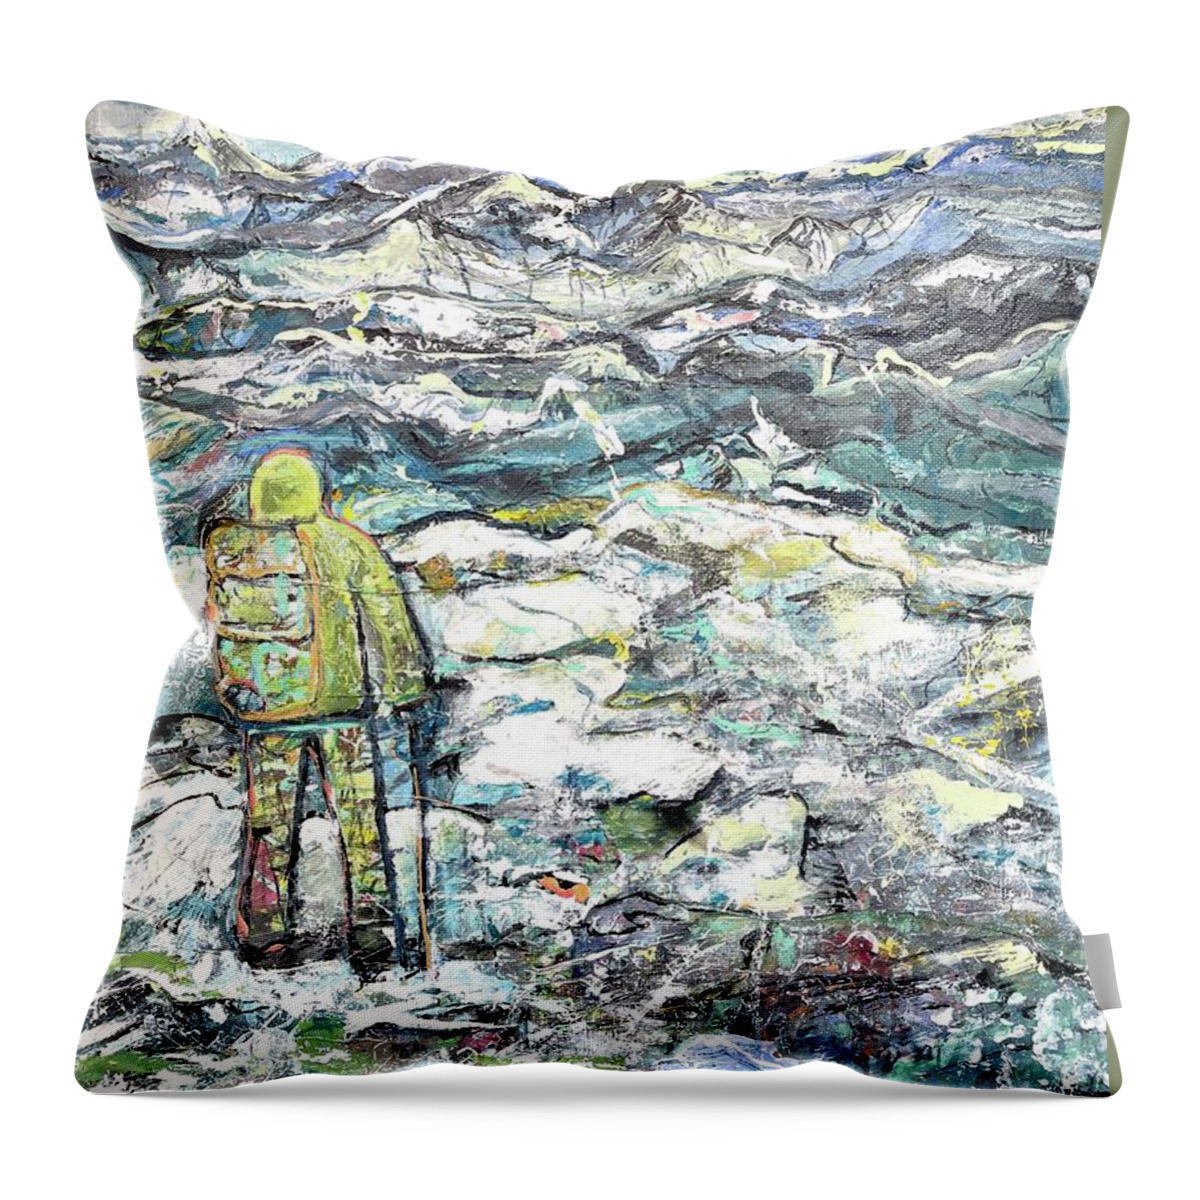 Waterscape Throw Pillow featuring the painting Tranquility by Evelina Popilian